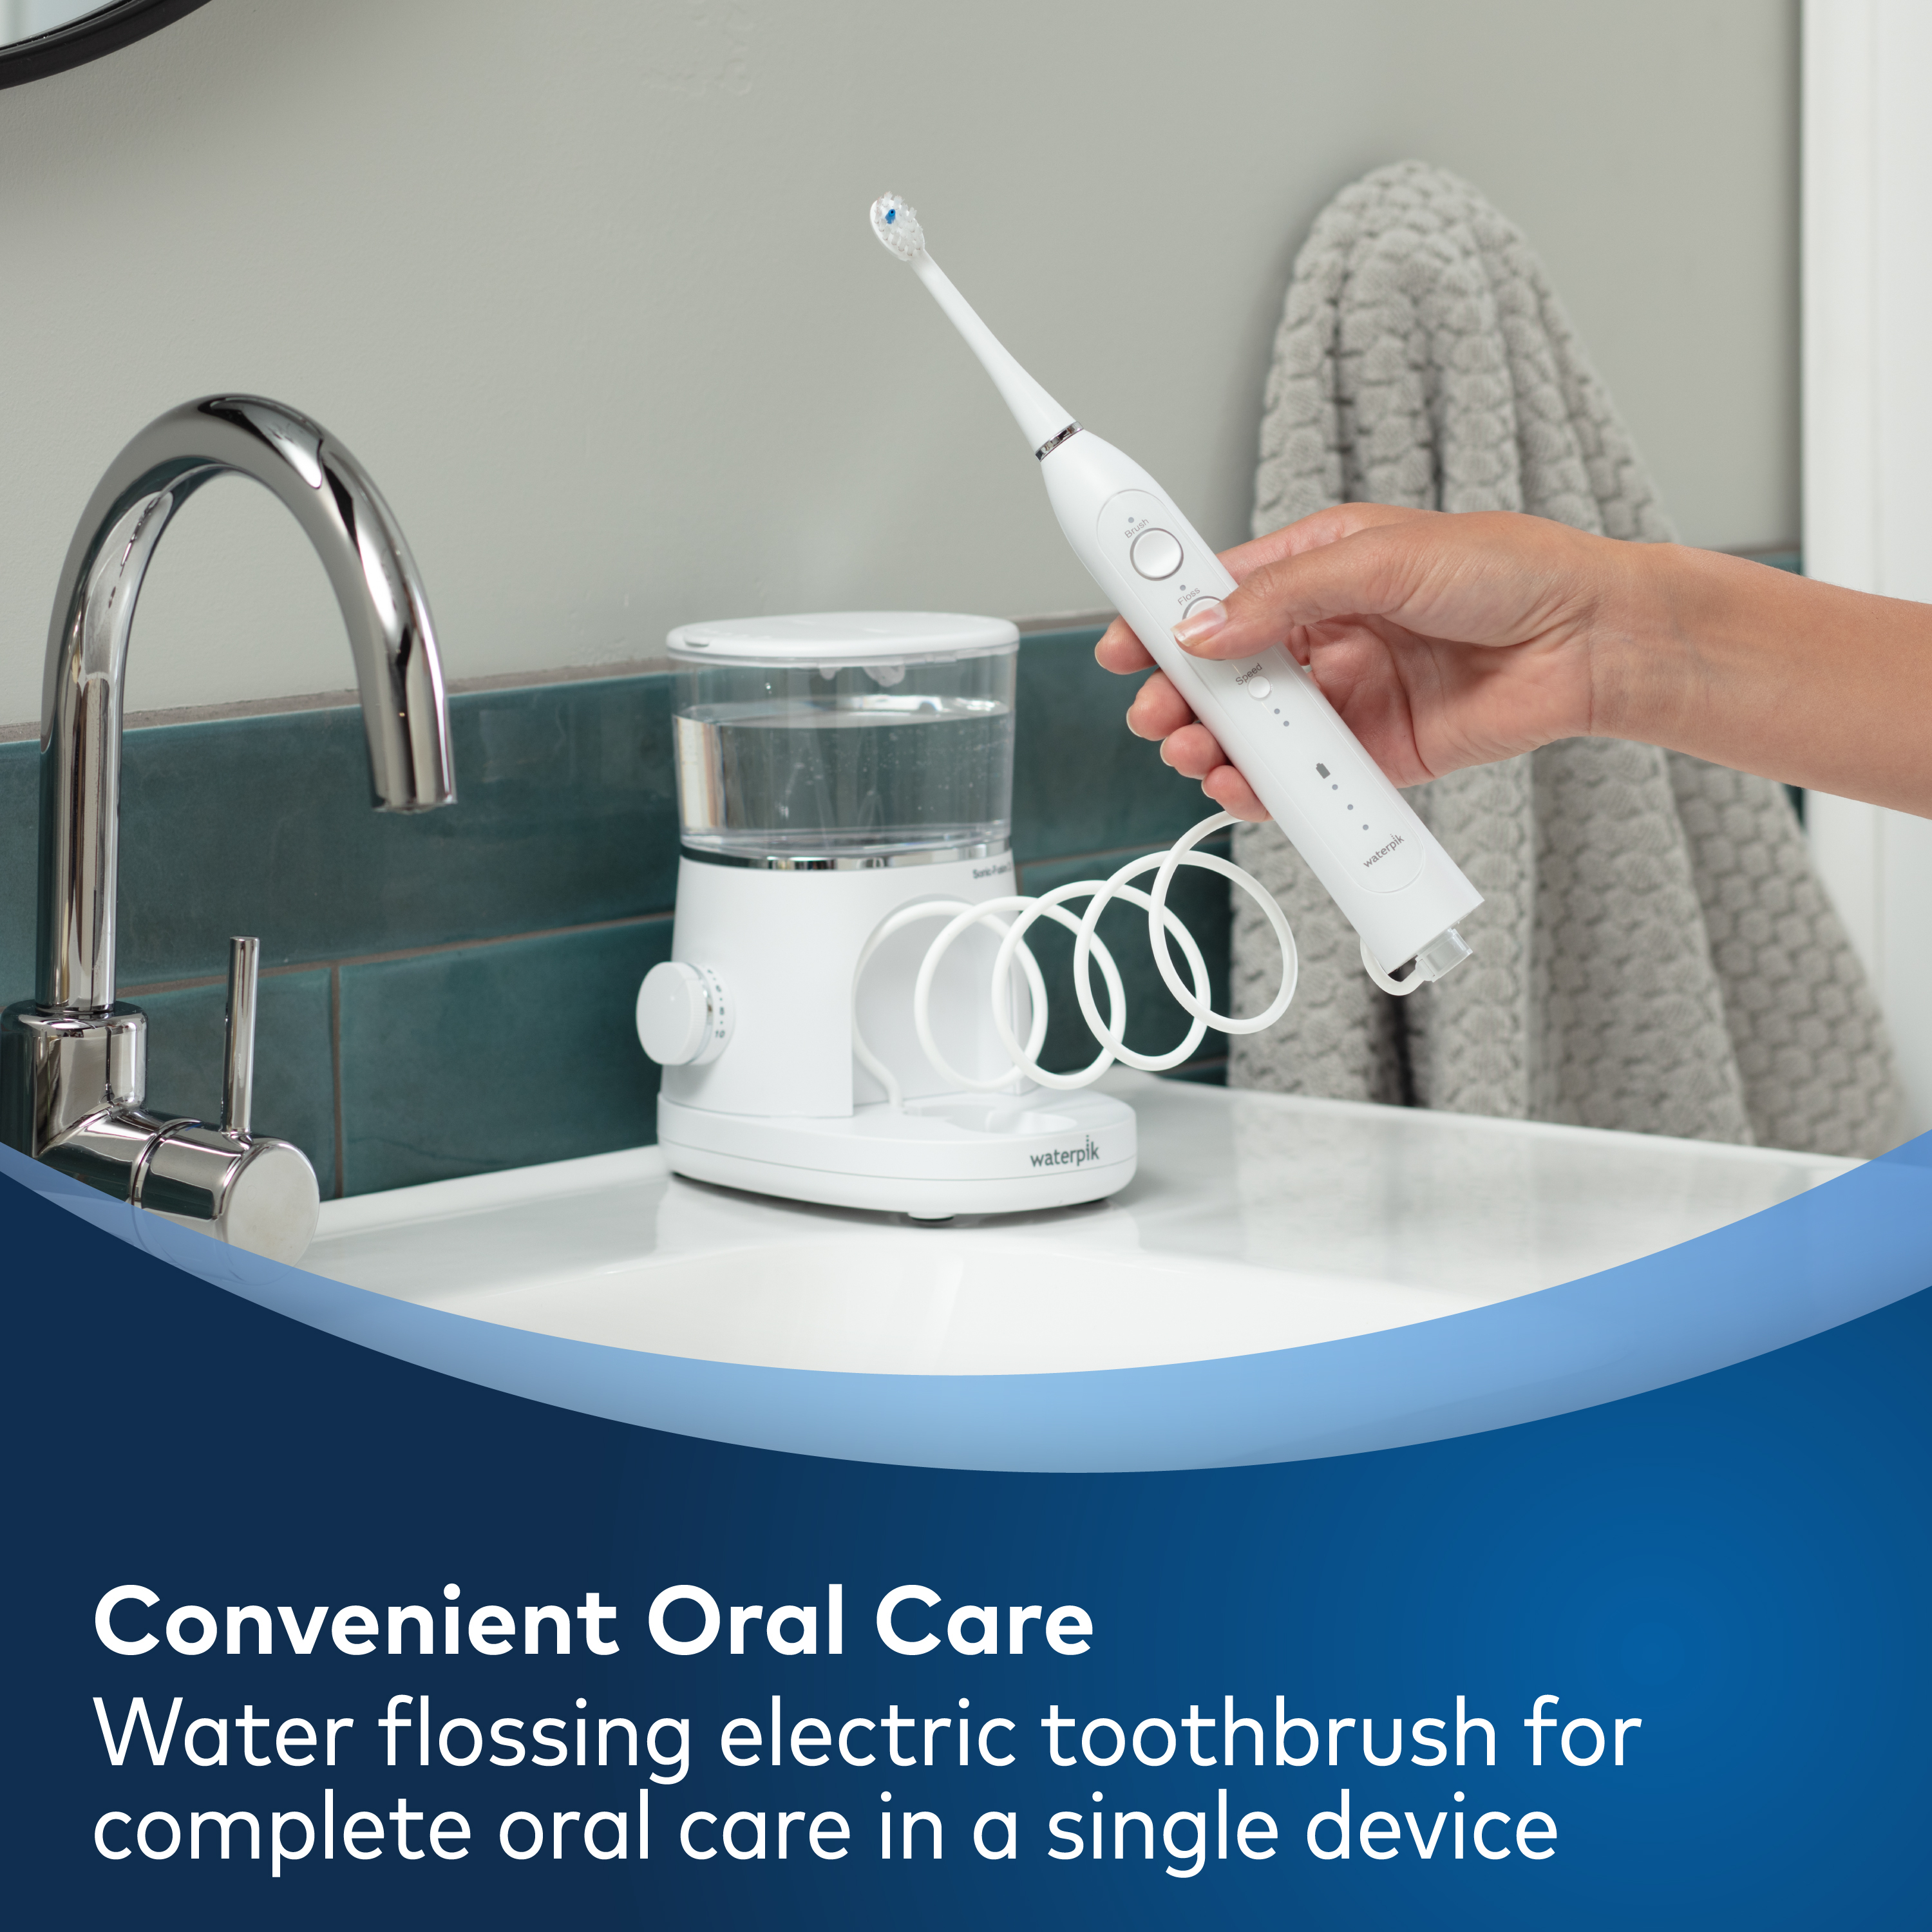 Waterpik Sonic-Fusion 2.0 Flossing Toothbrush, Electric Toothbrush & Water Flosser Combo, White - image 4 of 17